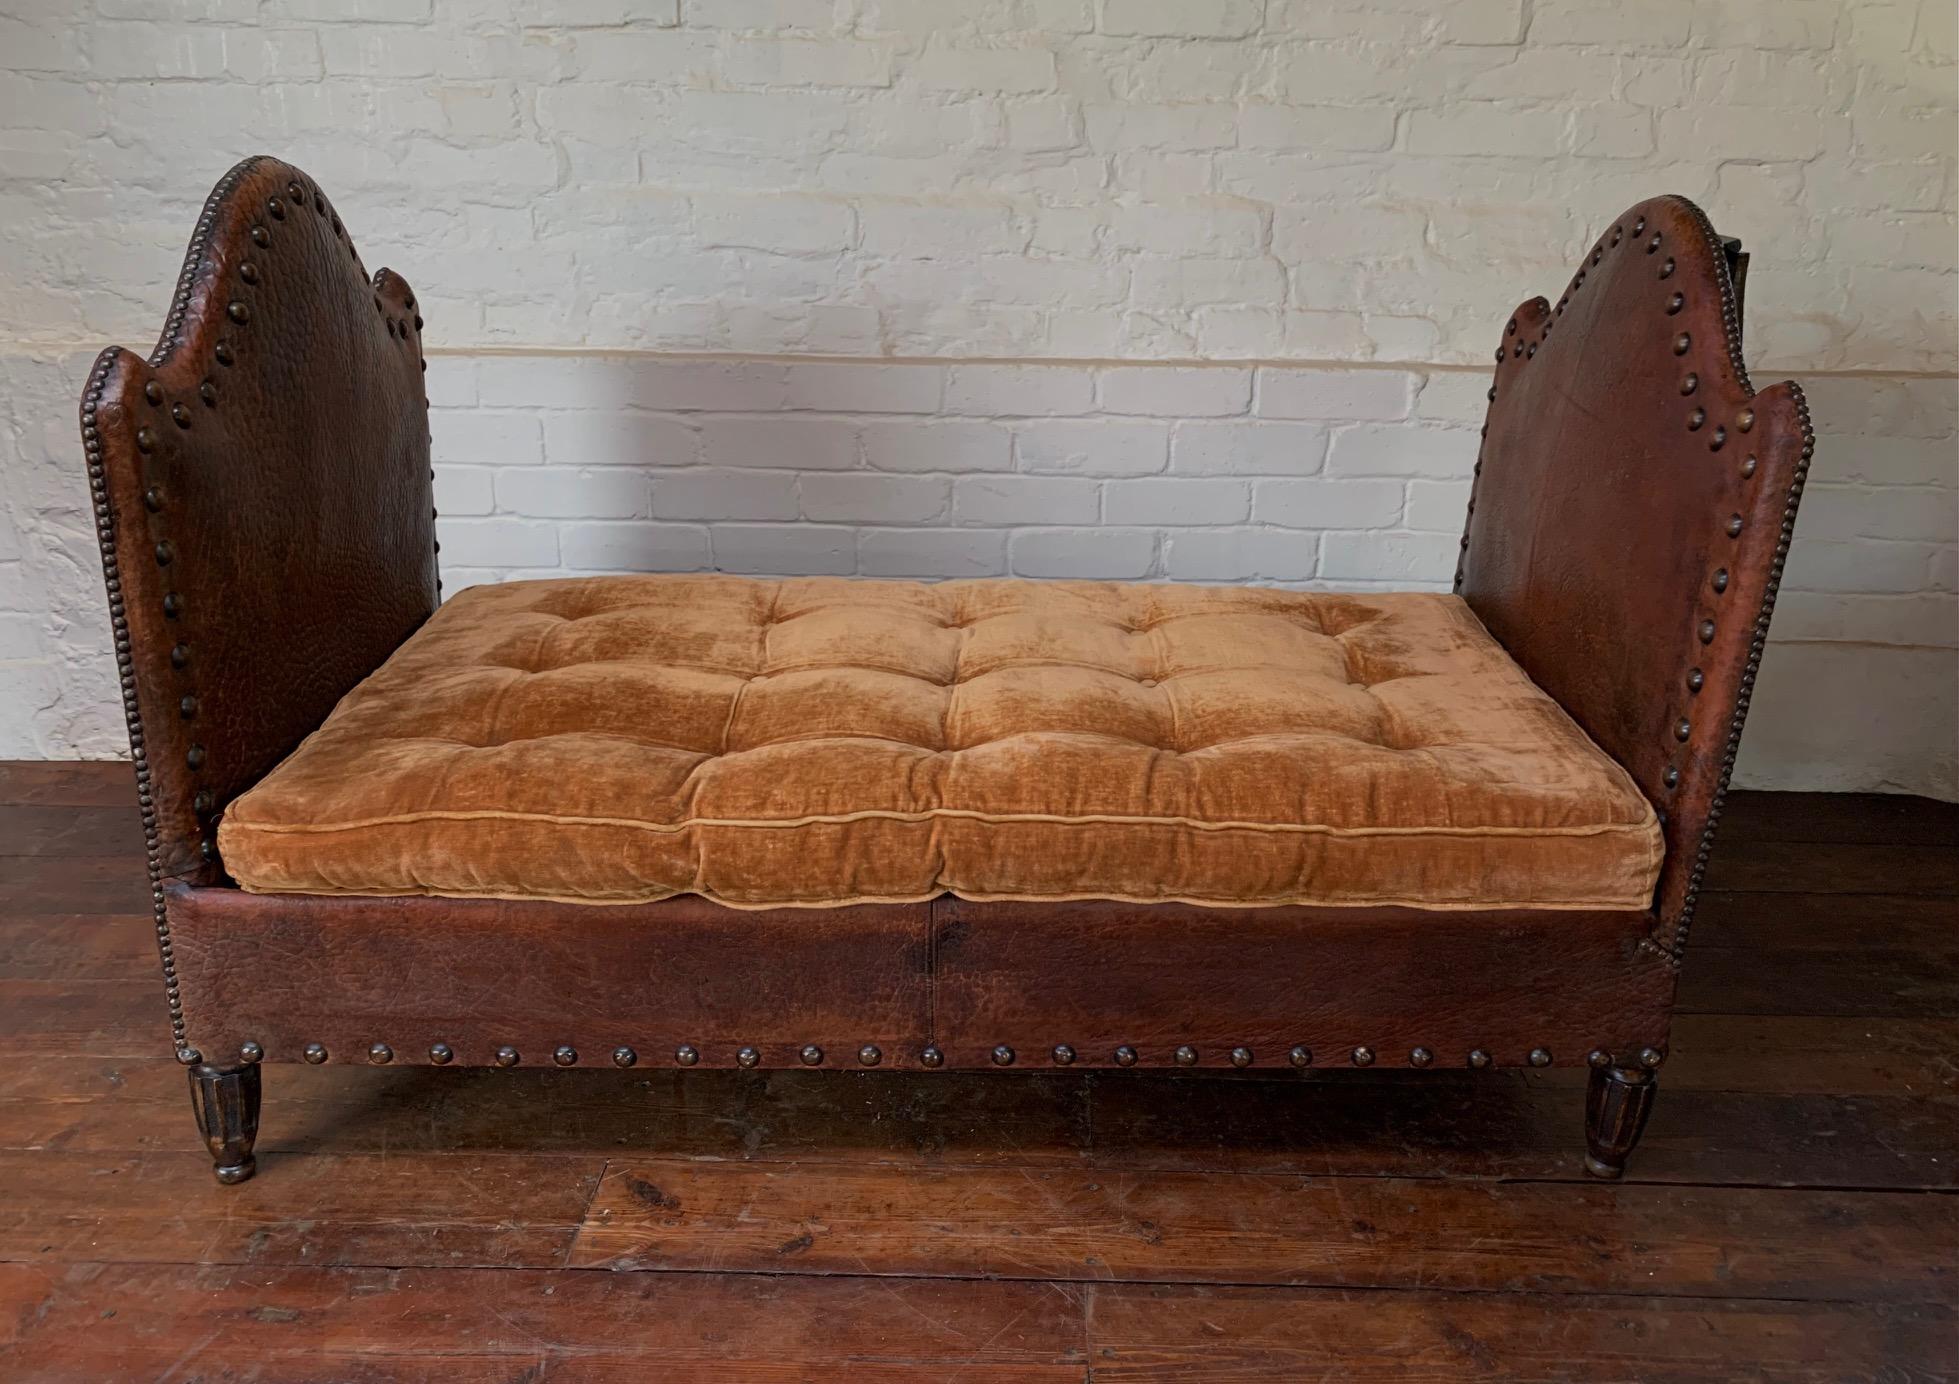 20th Century An Exquisite and Rare French Leather Daybed Completely Original, Circa 1920's For Sale